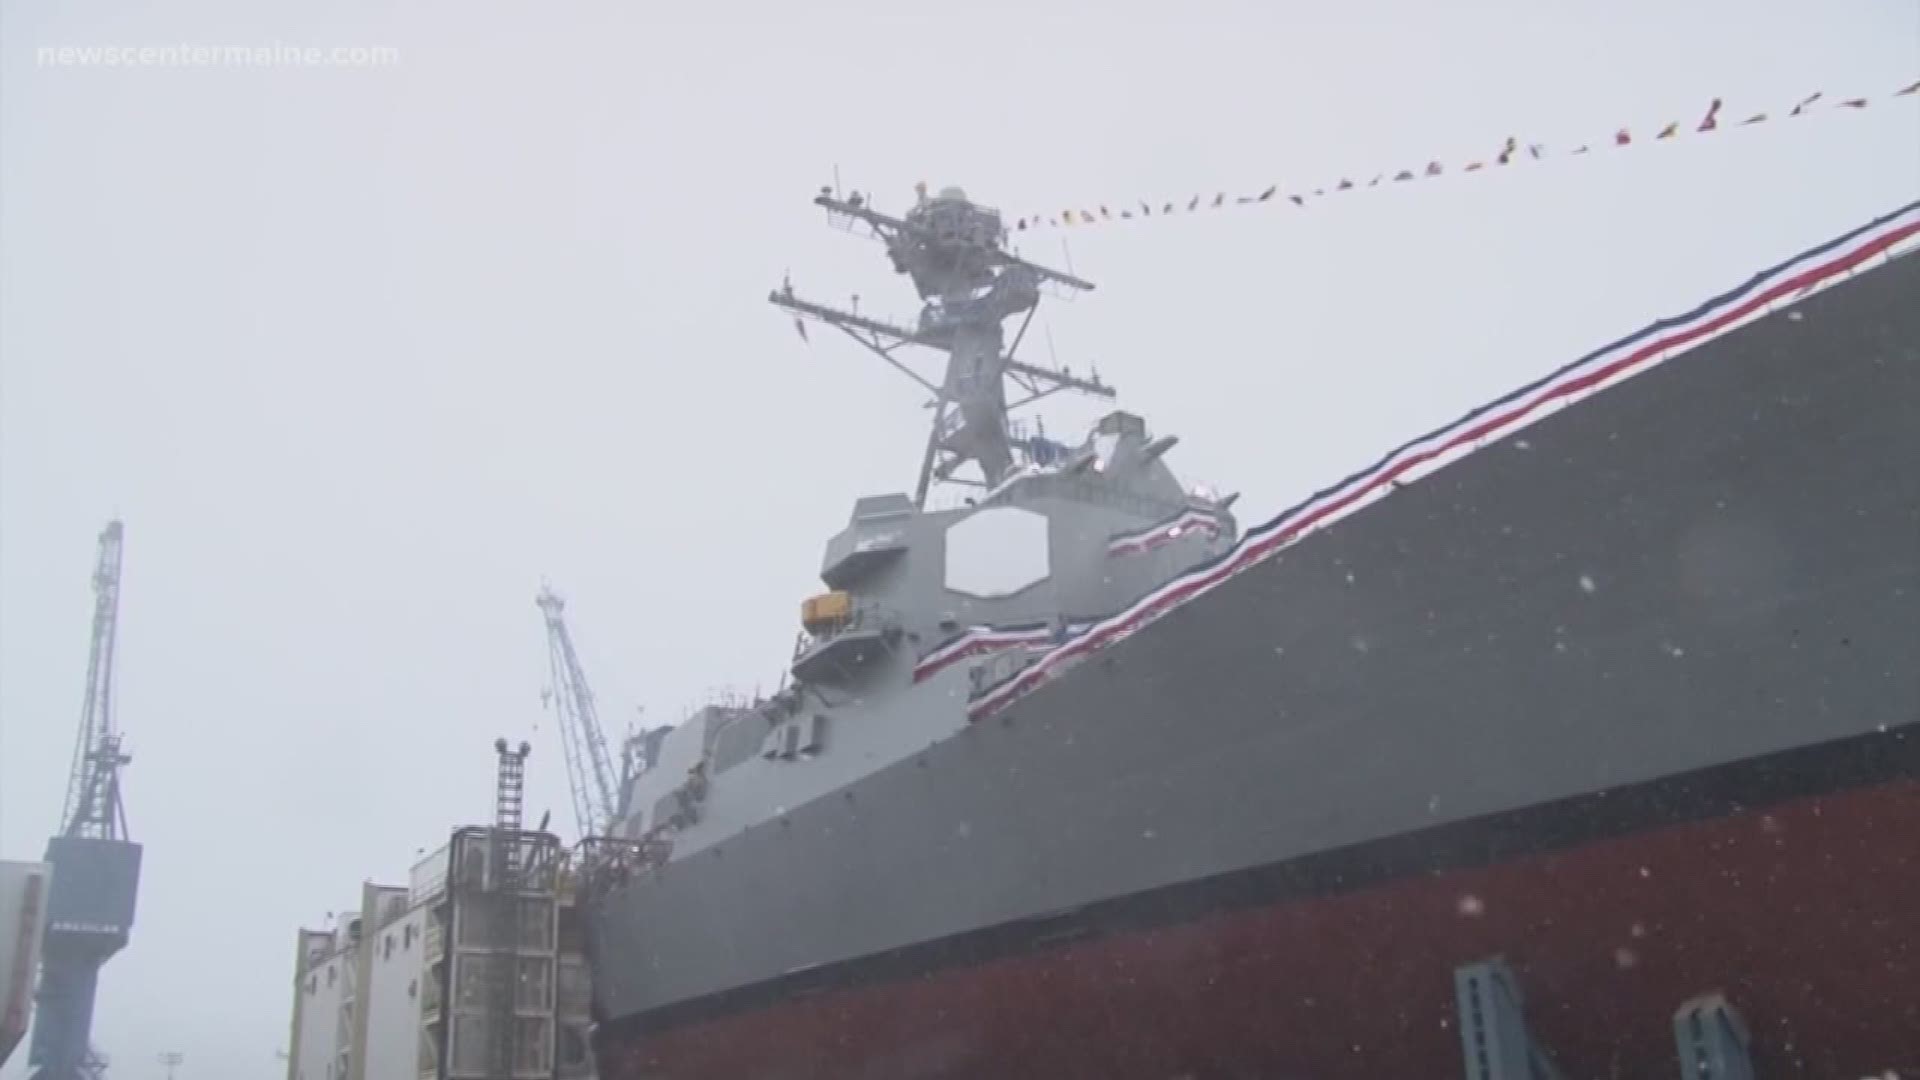 The newest navy ship is set for its first sail this weekend -- built at BIW and named after a war hero from Massachusetts.